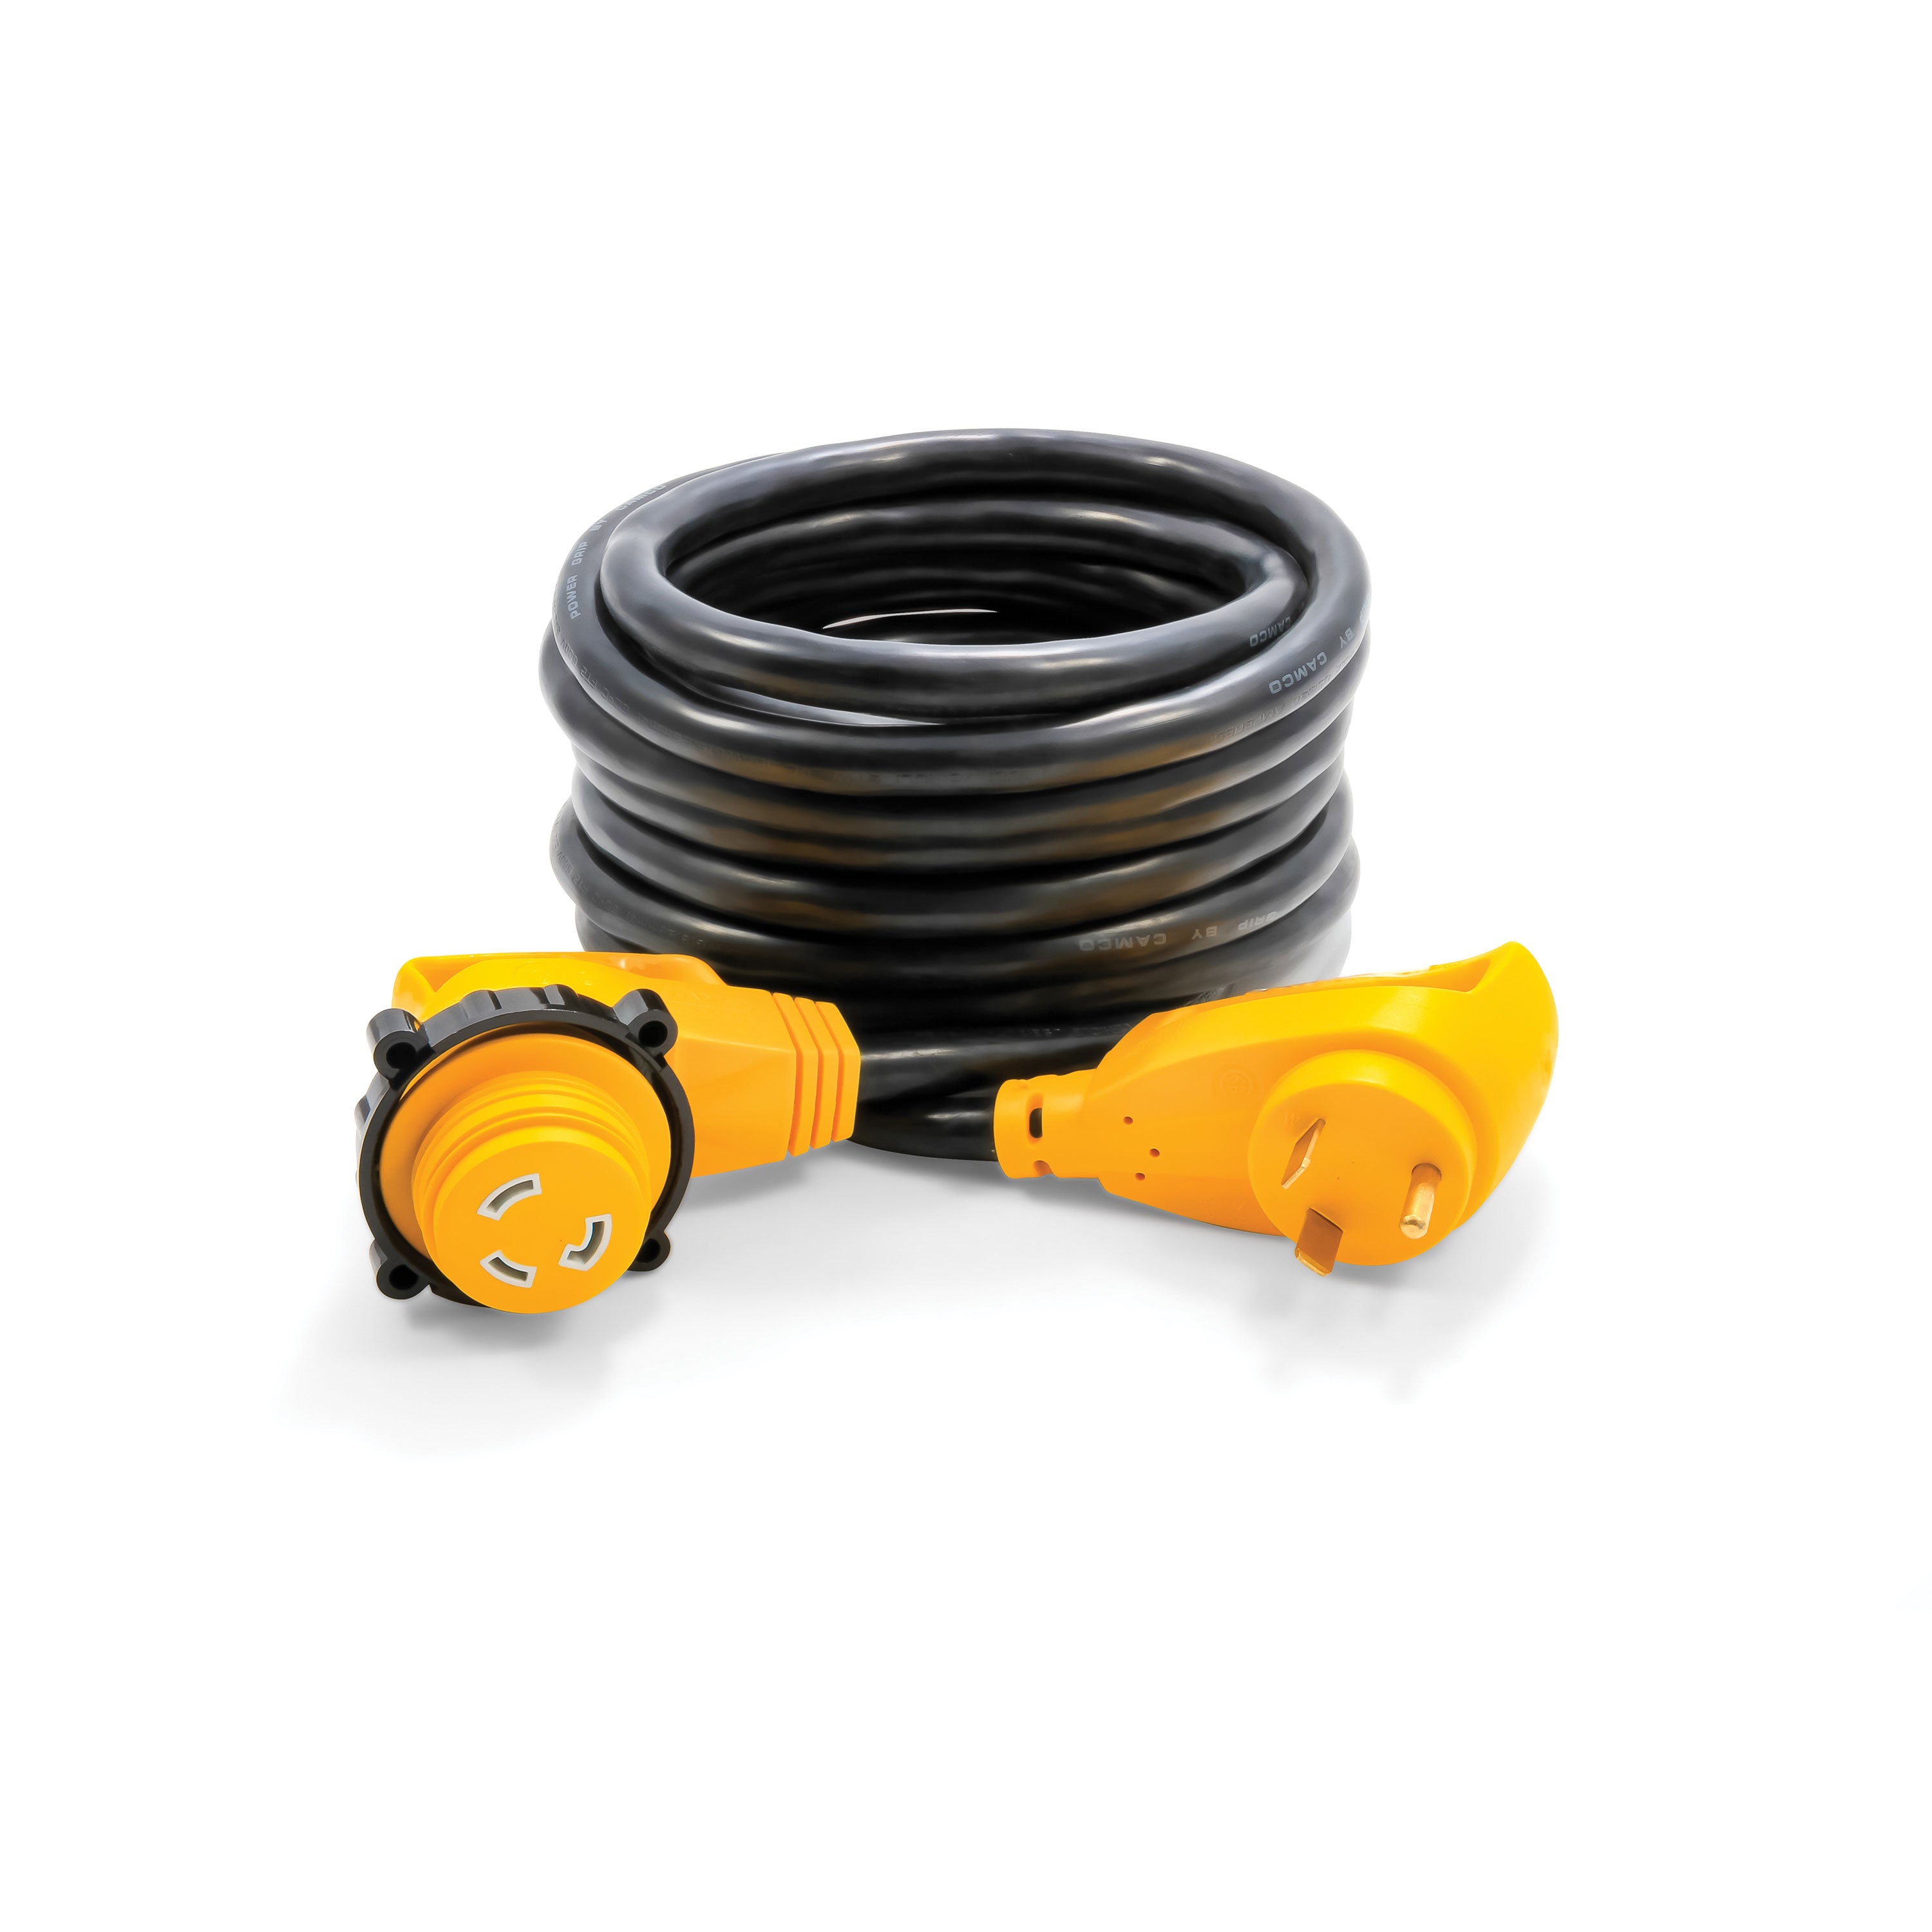 Camco 55524 30 Amp Power Grip Extension Cord with 90M/90F Locking Adapter - 25'